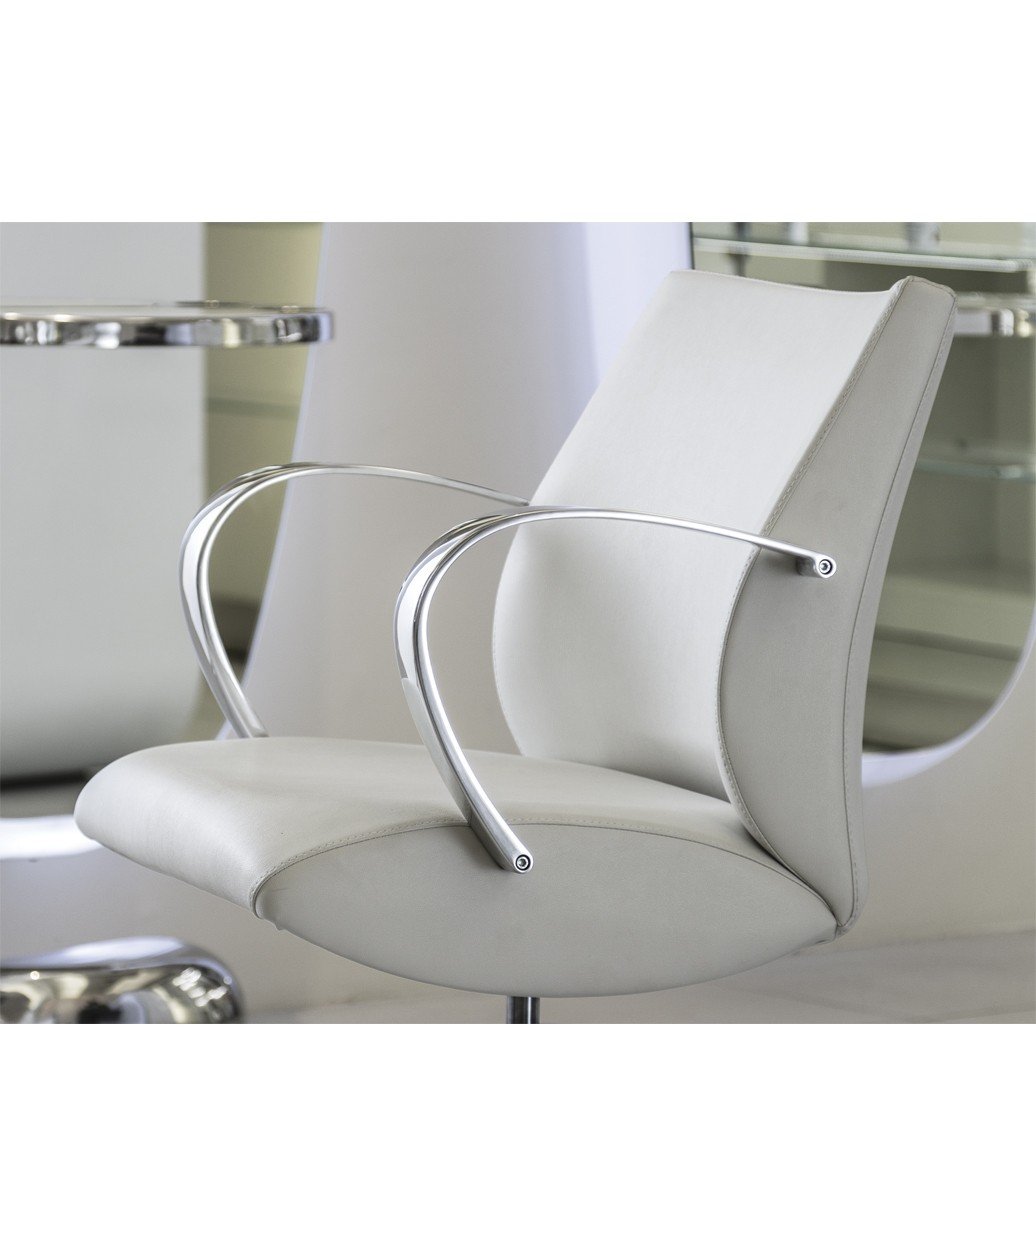 Belvedere Lioness Styling Chair